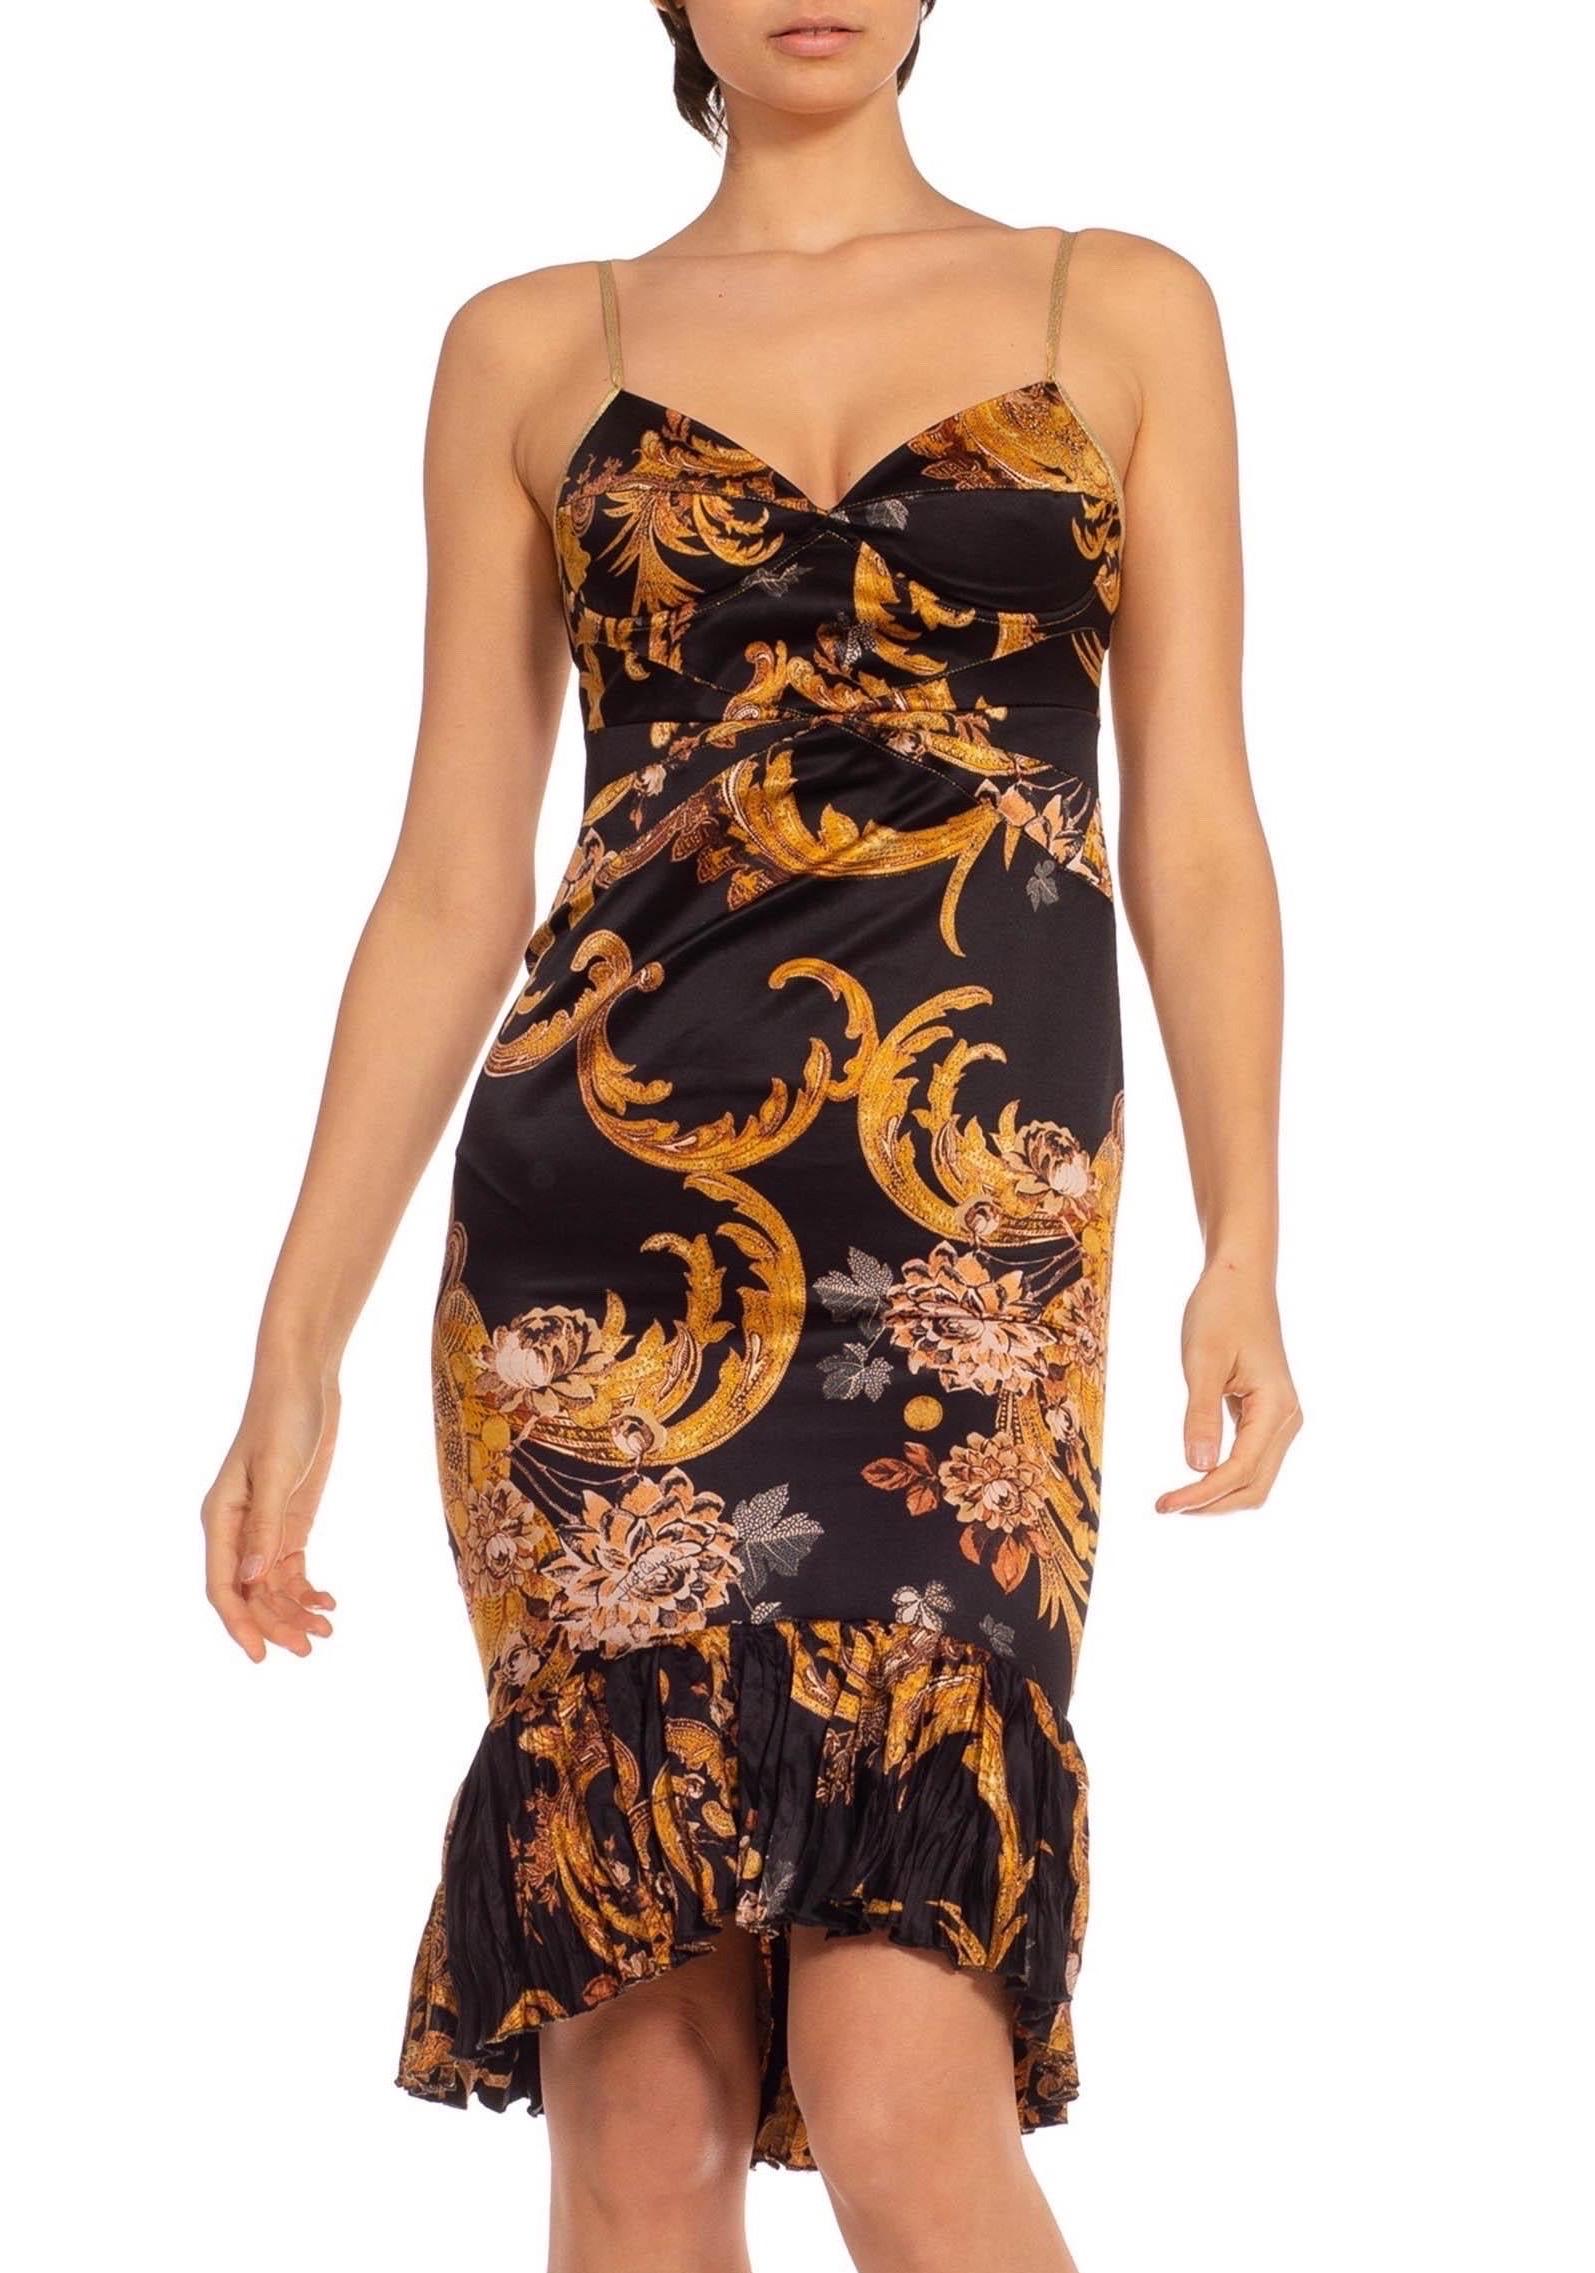 2000S ROBERTO CAVALLI Black & Gold Silk Blend Baroque Printed Cocktail Dress With Jewels